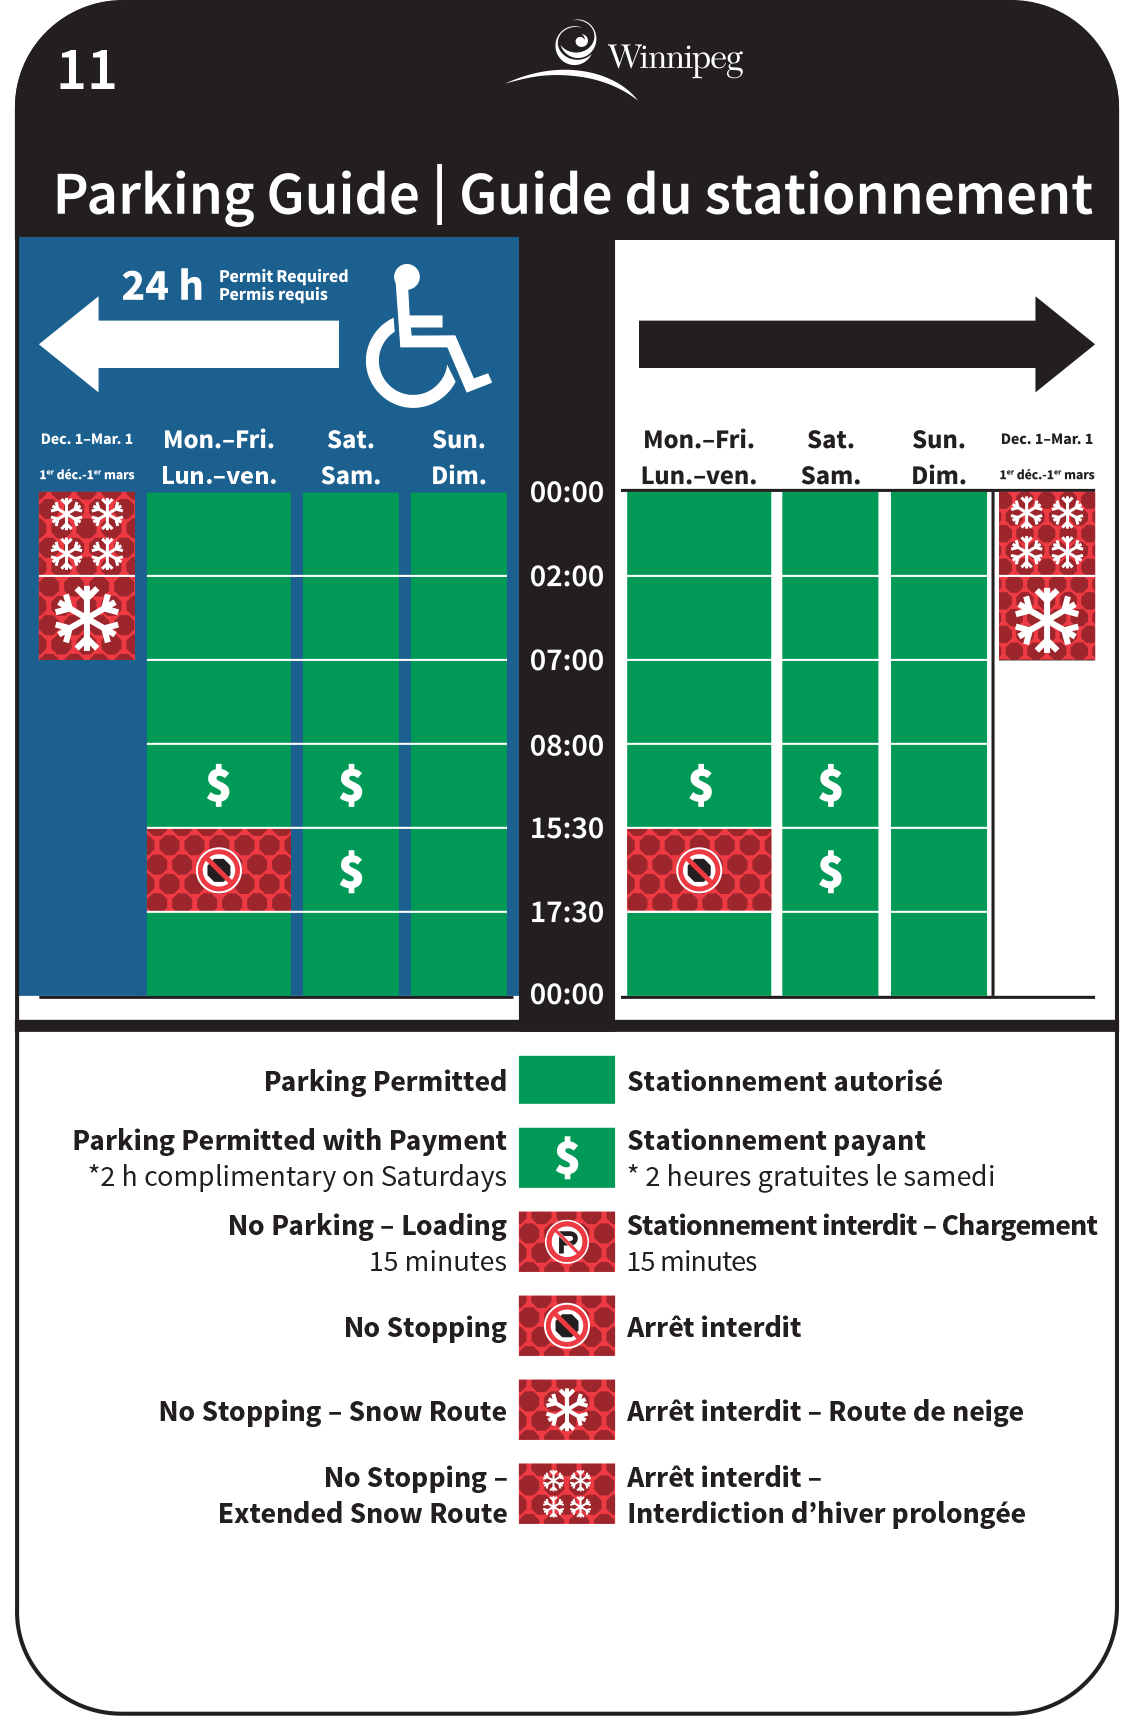 New parking guides